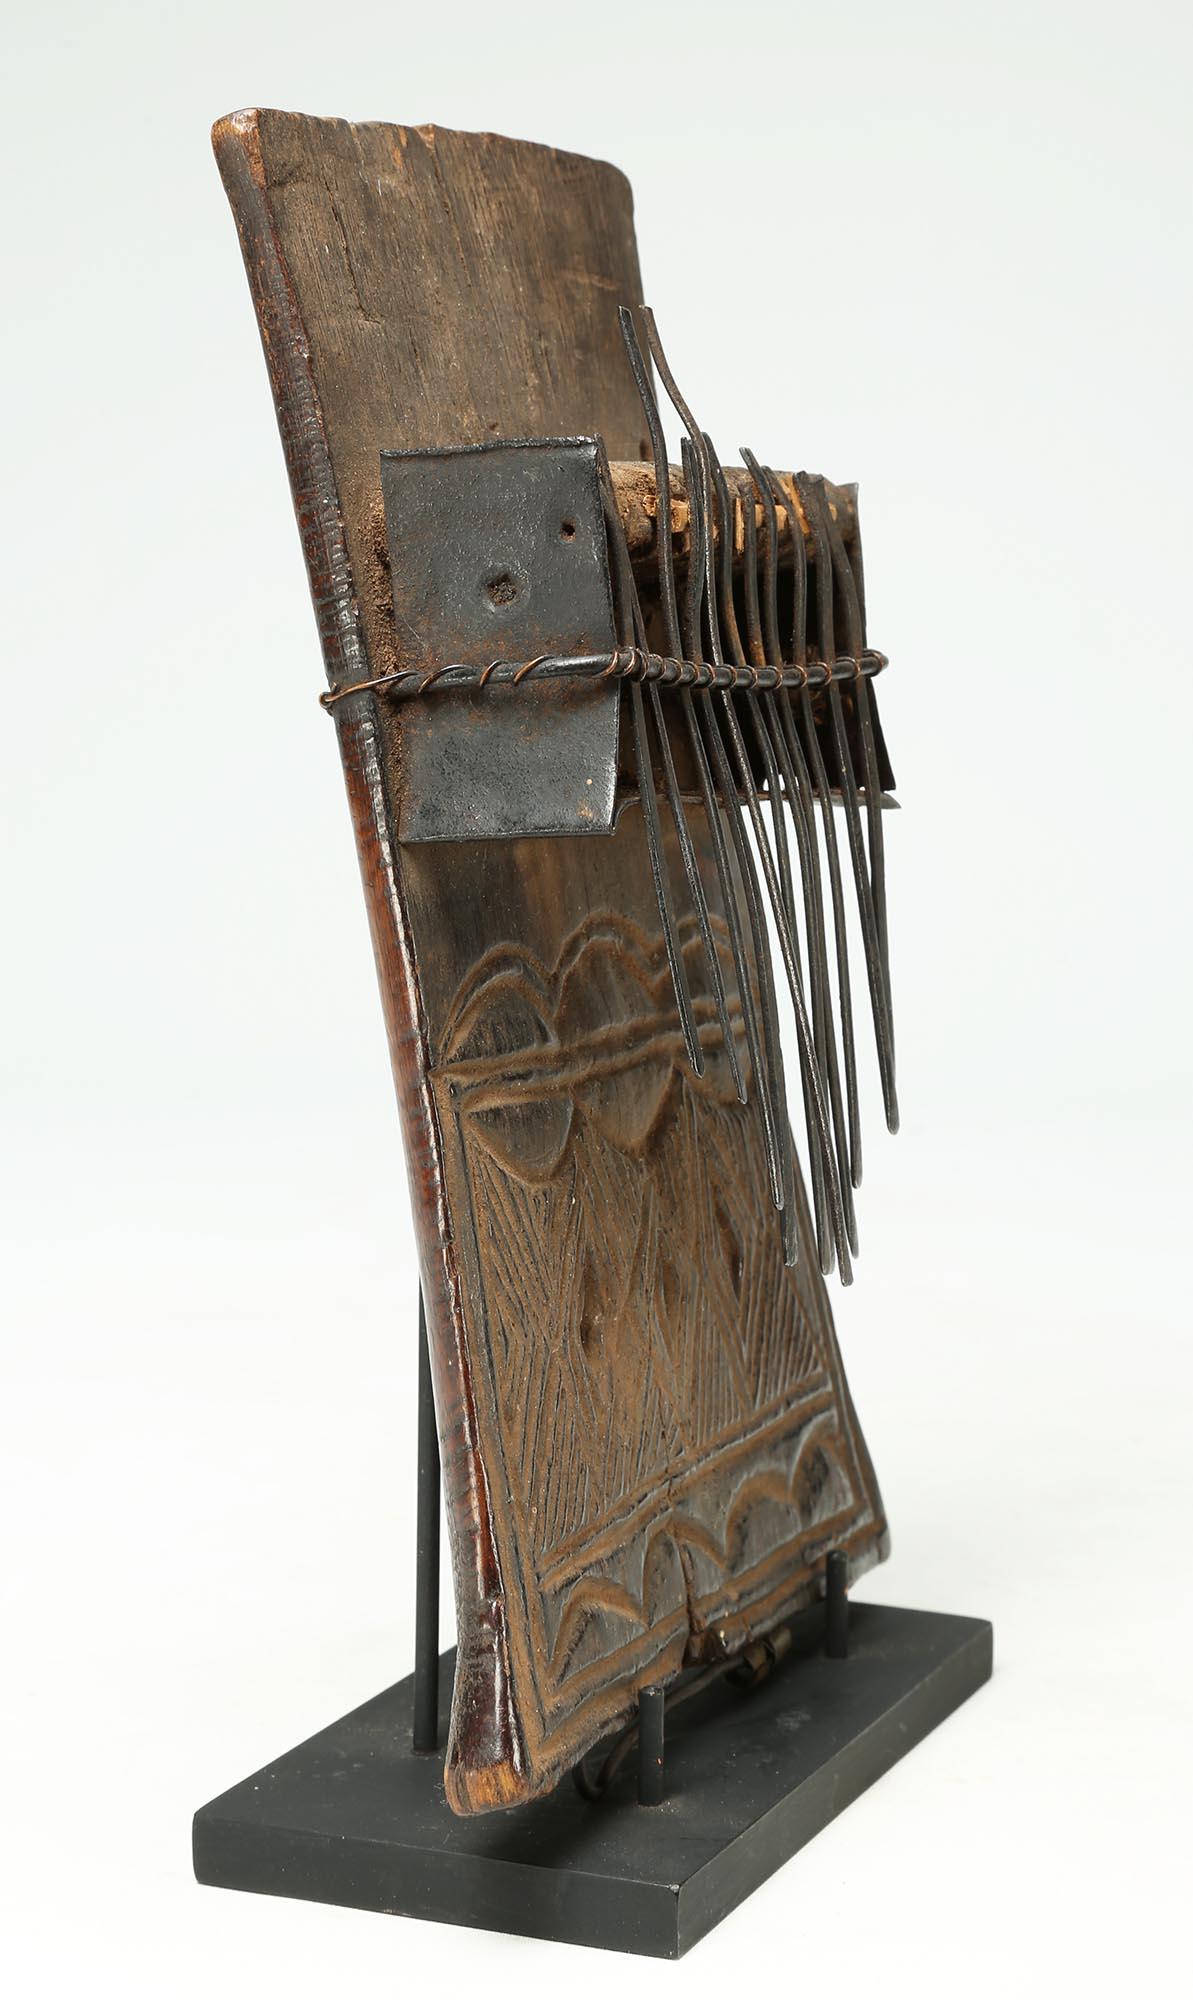 Hand-Carved Mbira or Sanza Congo Early 20th Century African Tribal Musical Instrument